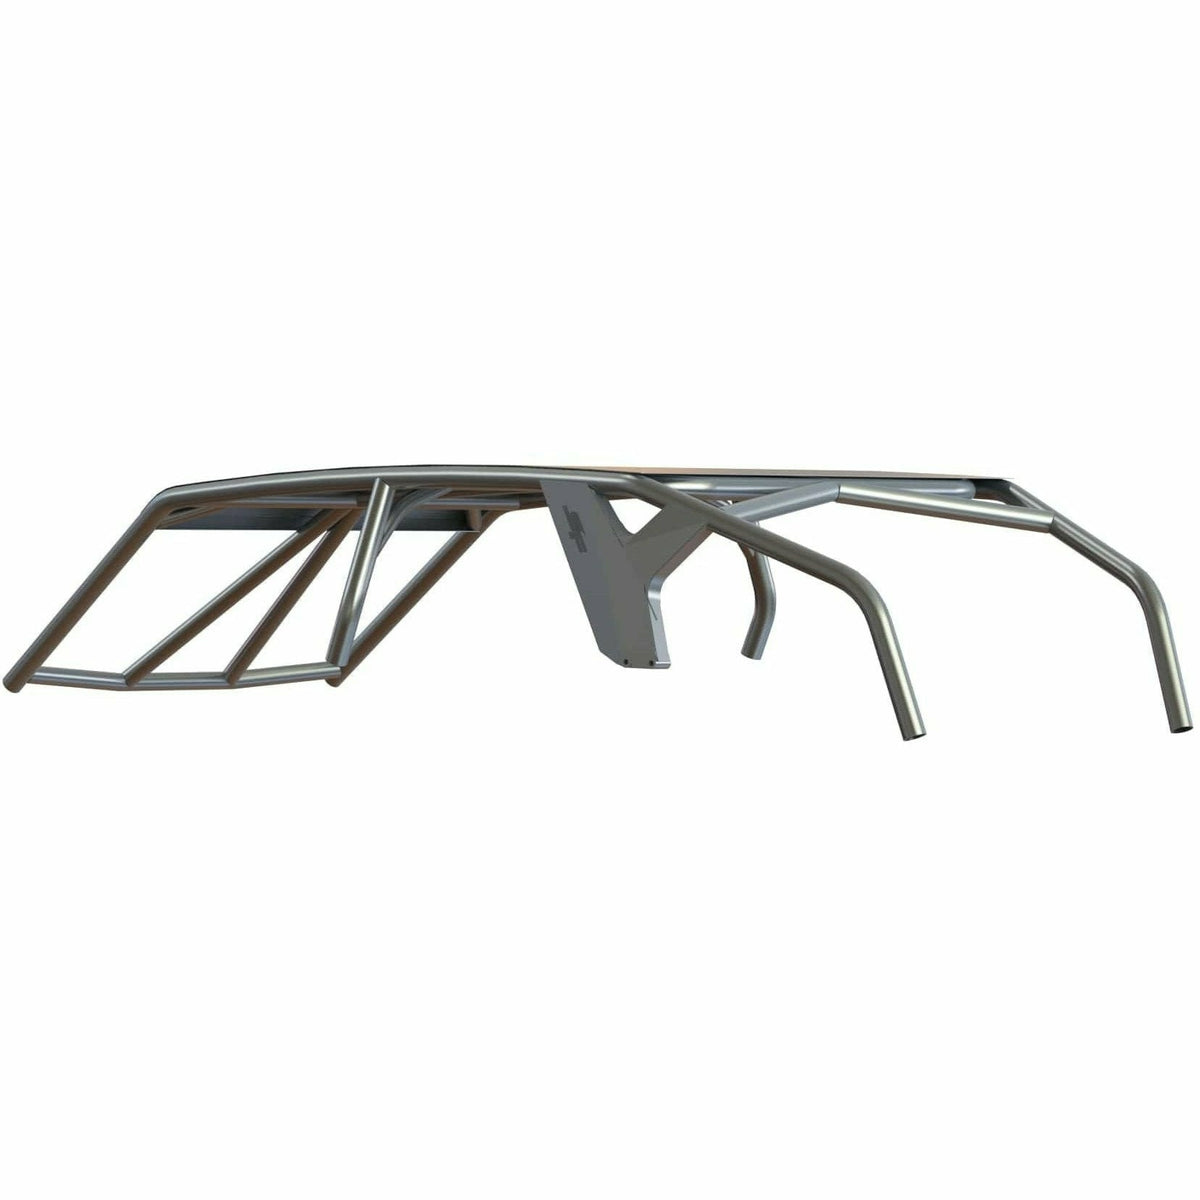 SF RaceWorks Polaris RZR XP Turbo S 4 Seat Raw Cage Kit with Roof